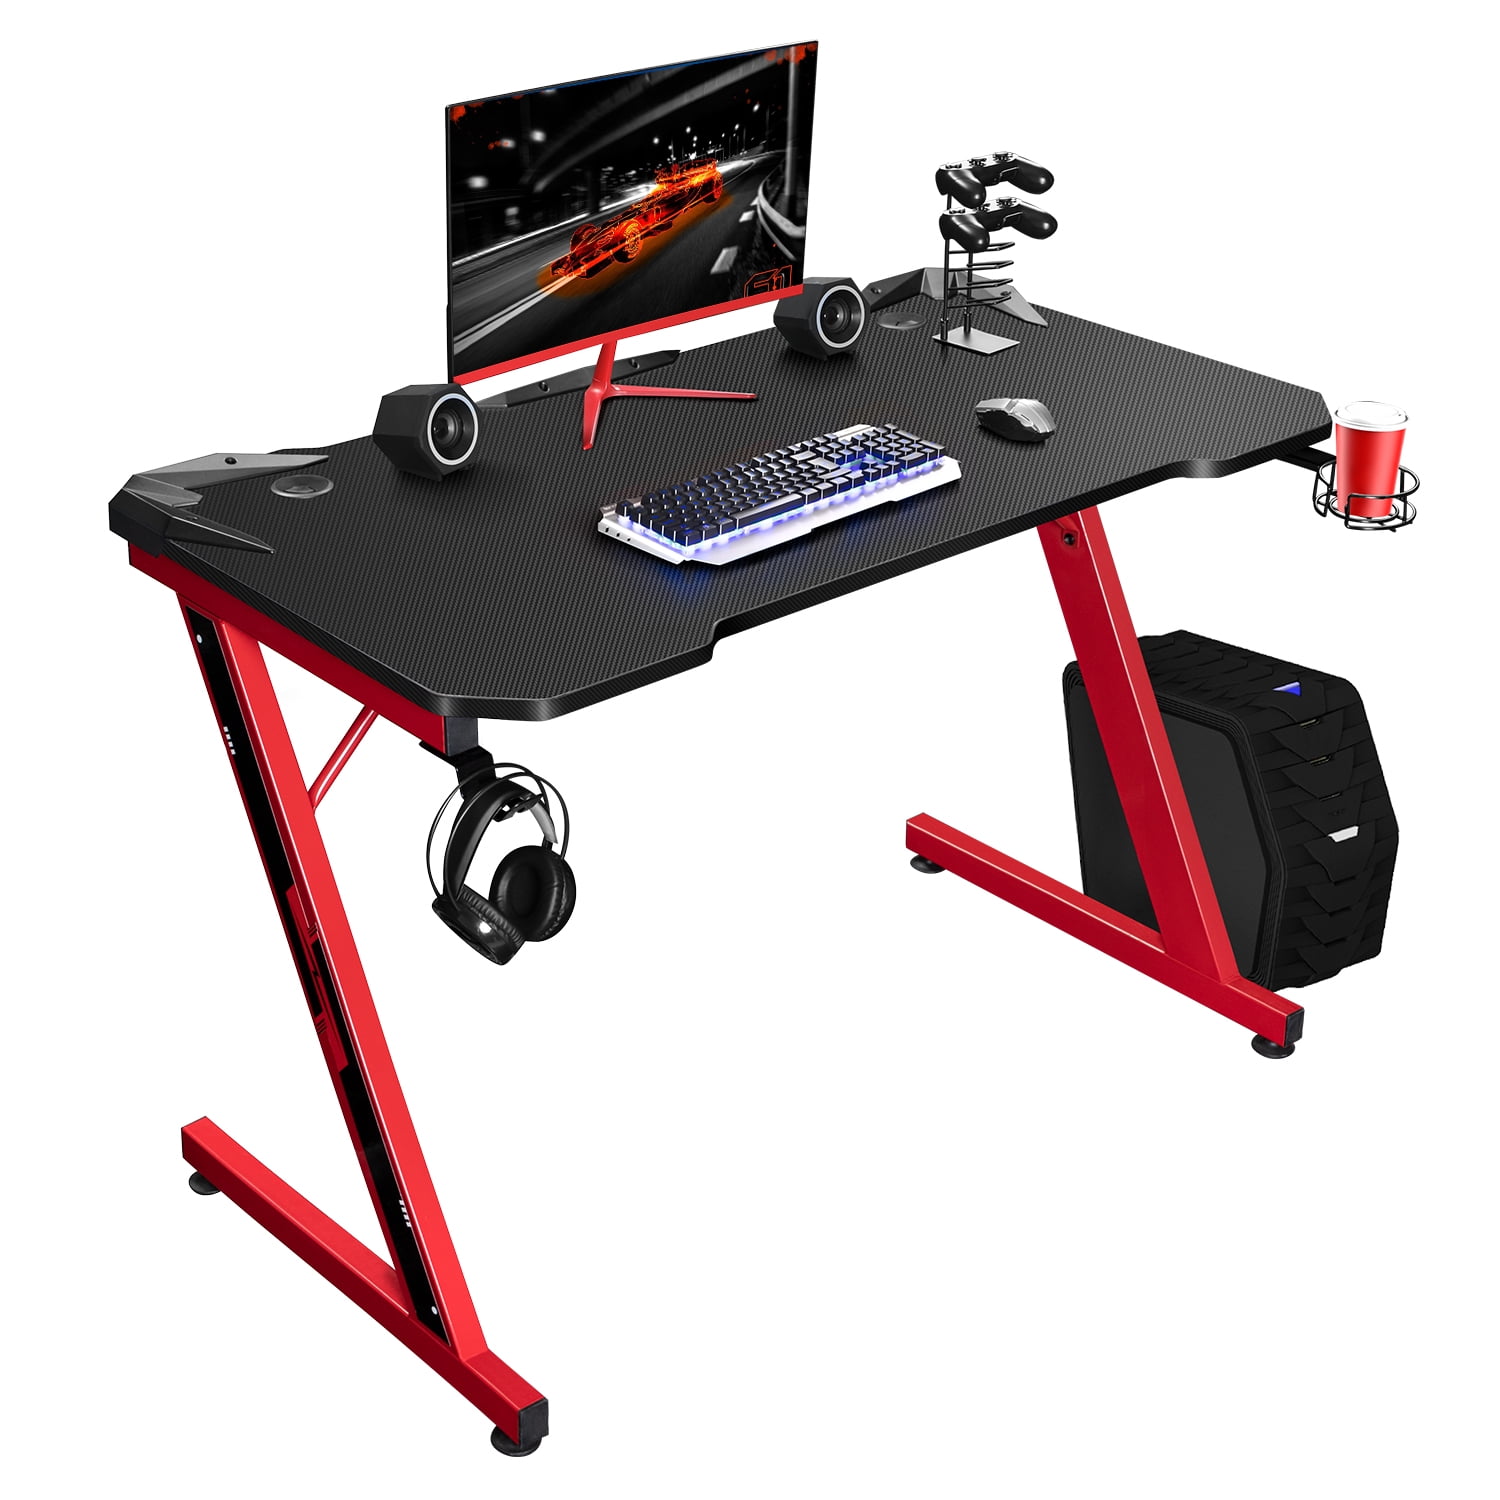 ARTETHYS Gaming Desk with Breathing RGB LED Lights 43.3-inch Tempered Glass  Desktop Gaming Table Z Shaped PC Gamer Workstations with Cup Holder 